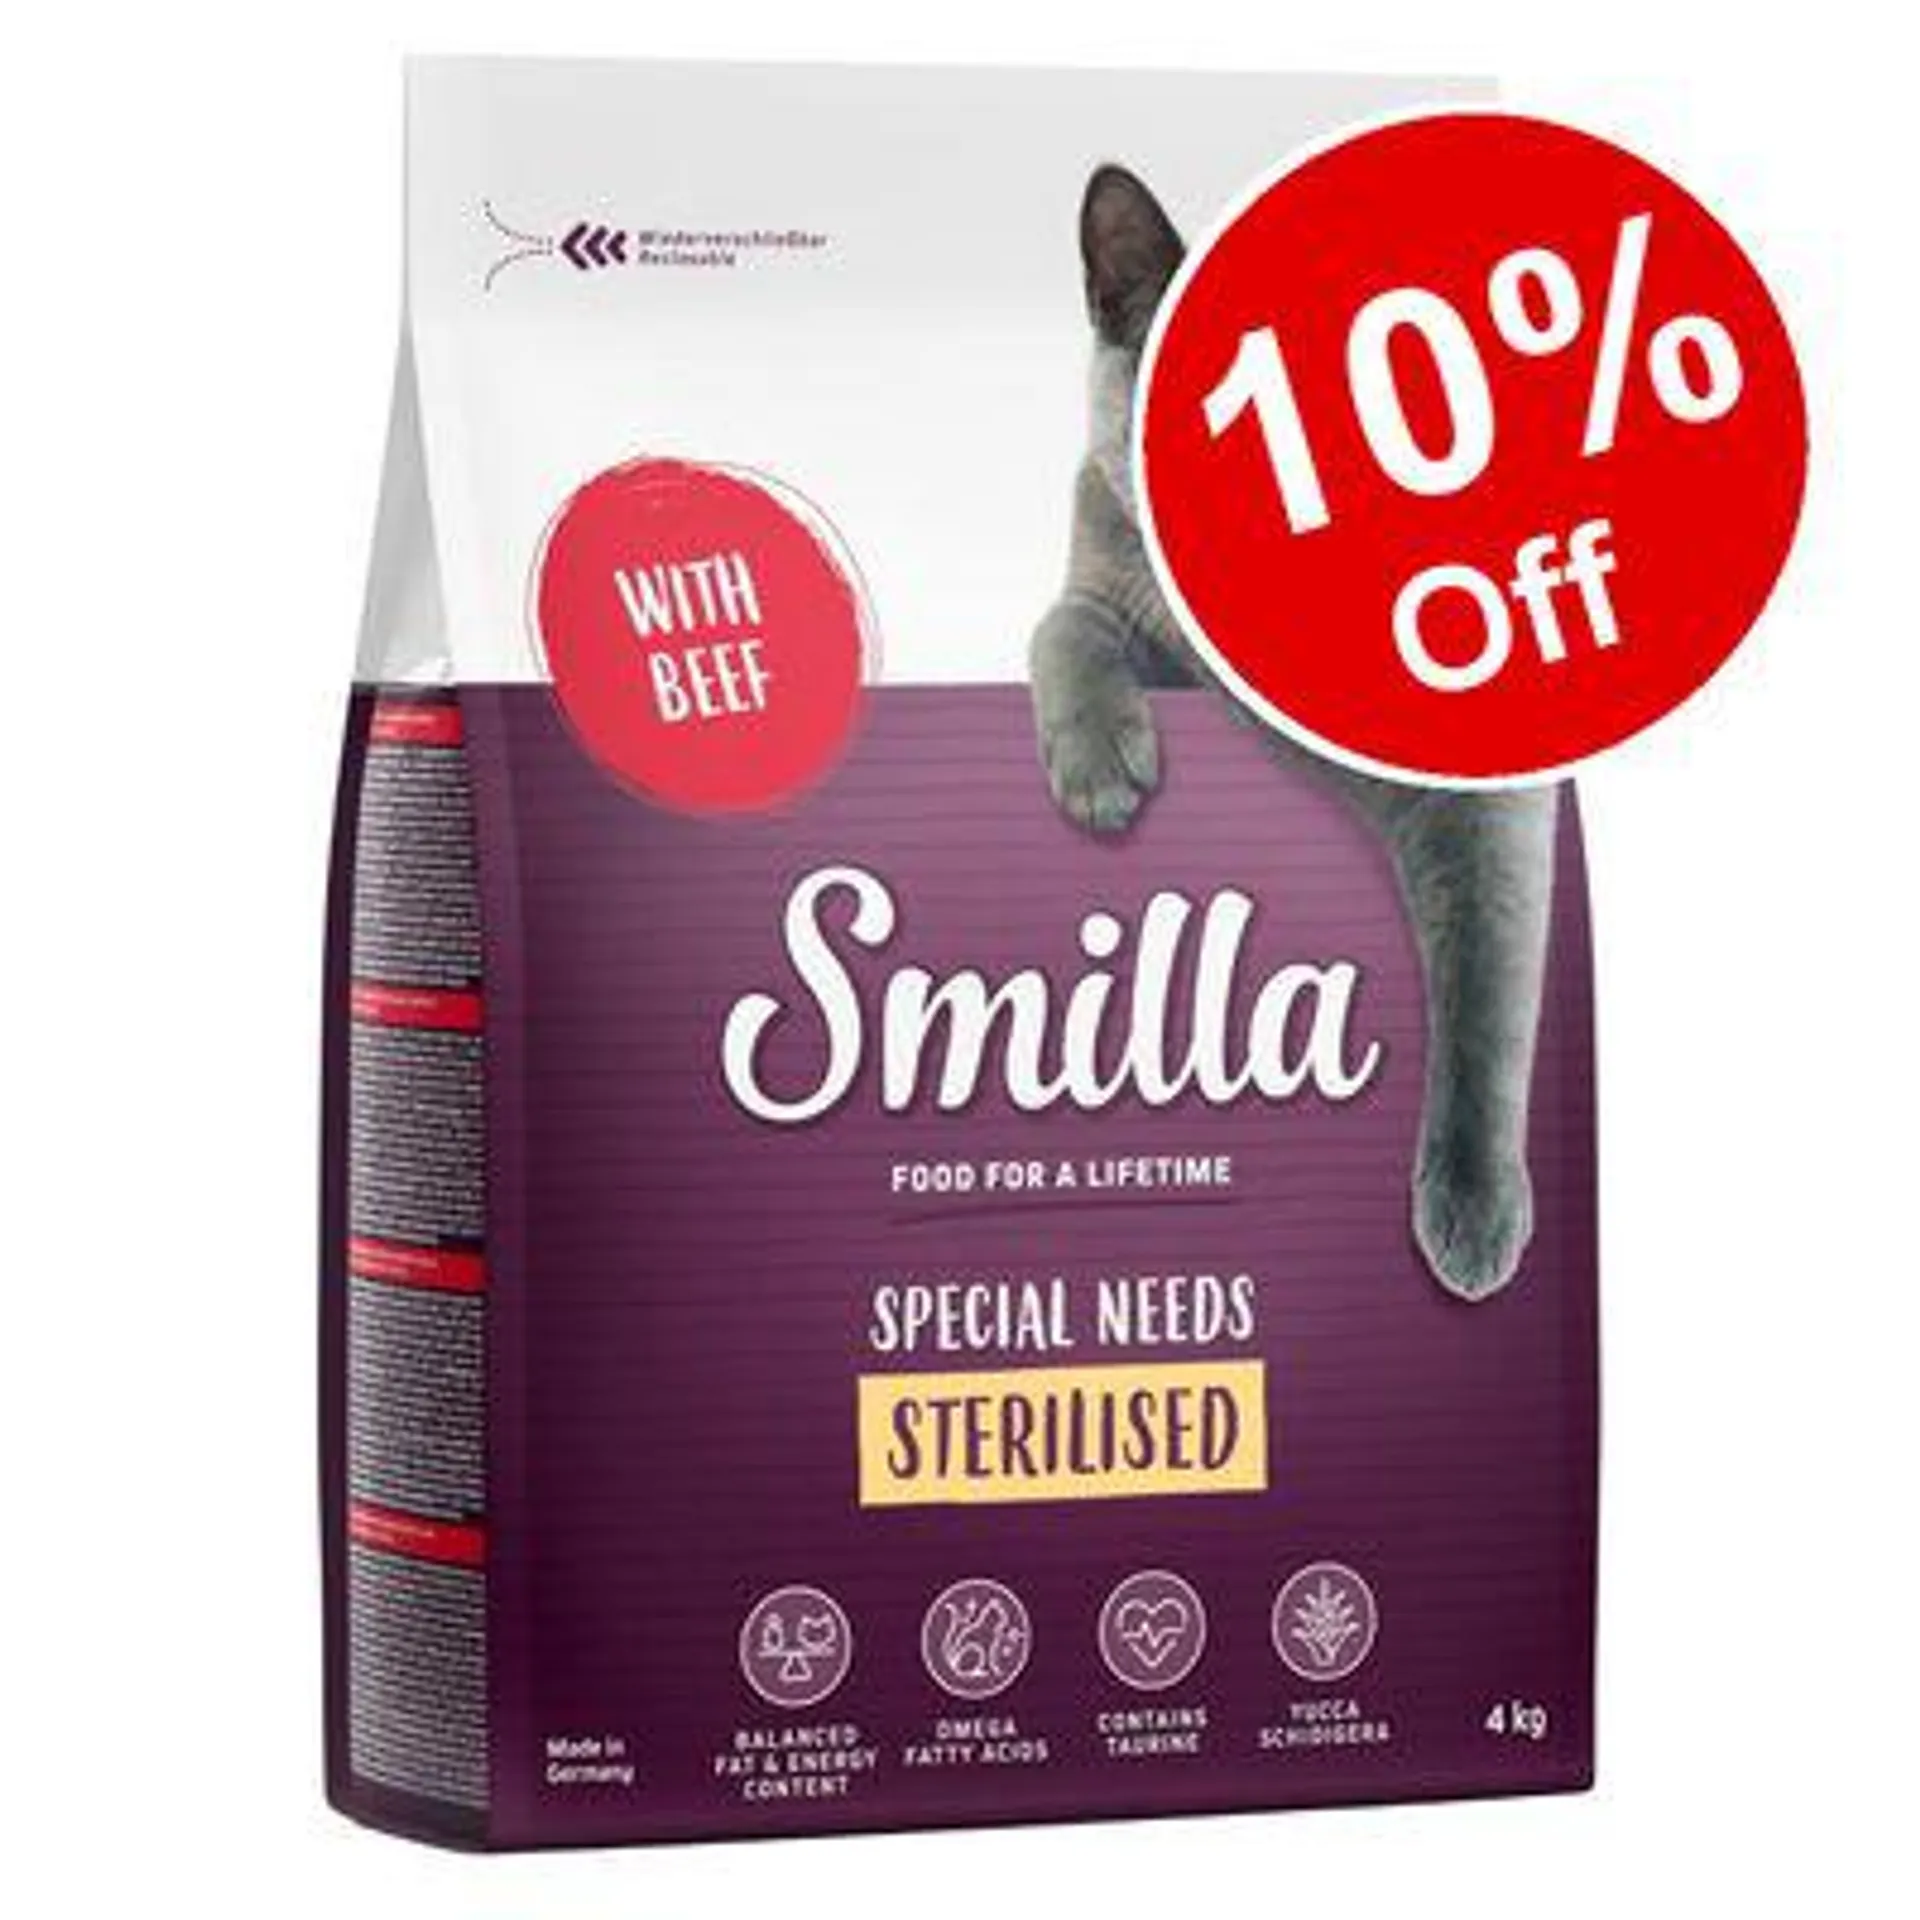 Smilla Adult Light and Sterlised Dry & Wet Cat Food - 10% Off!*